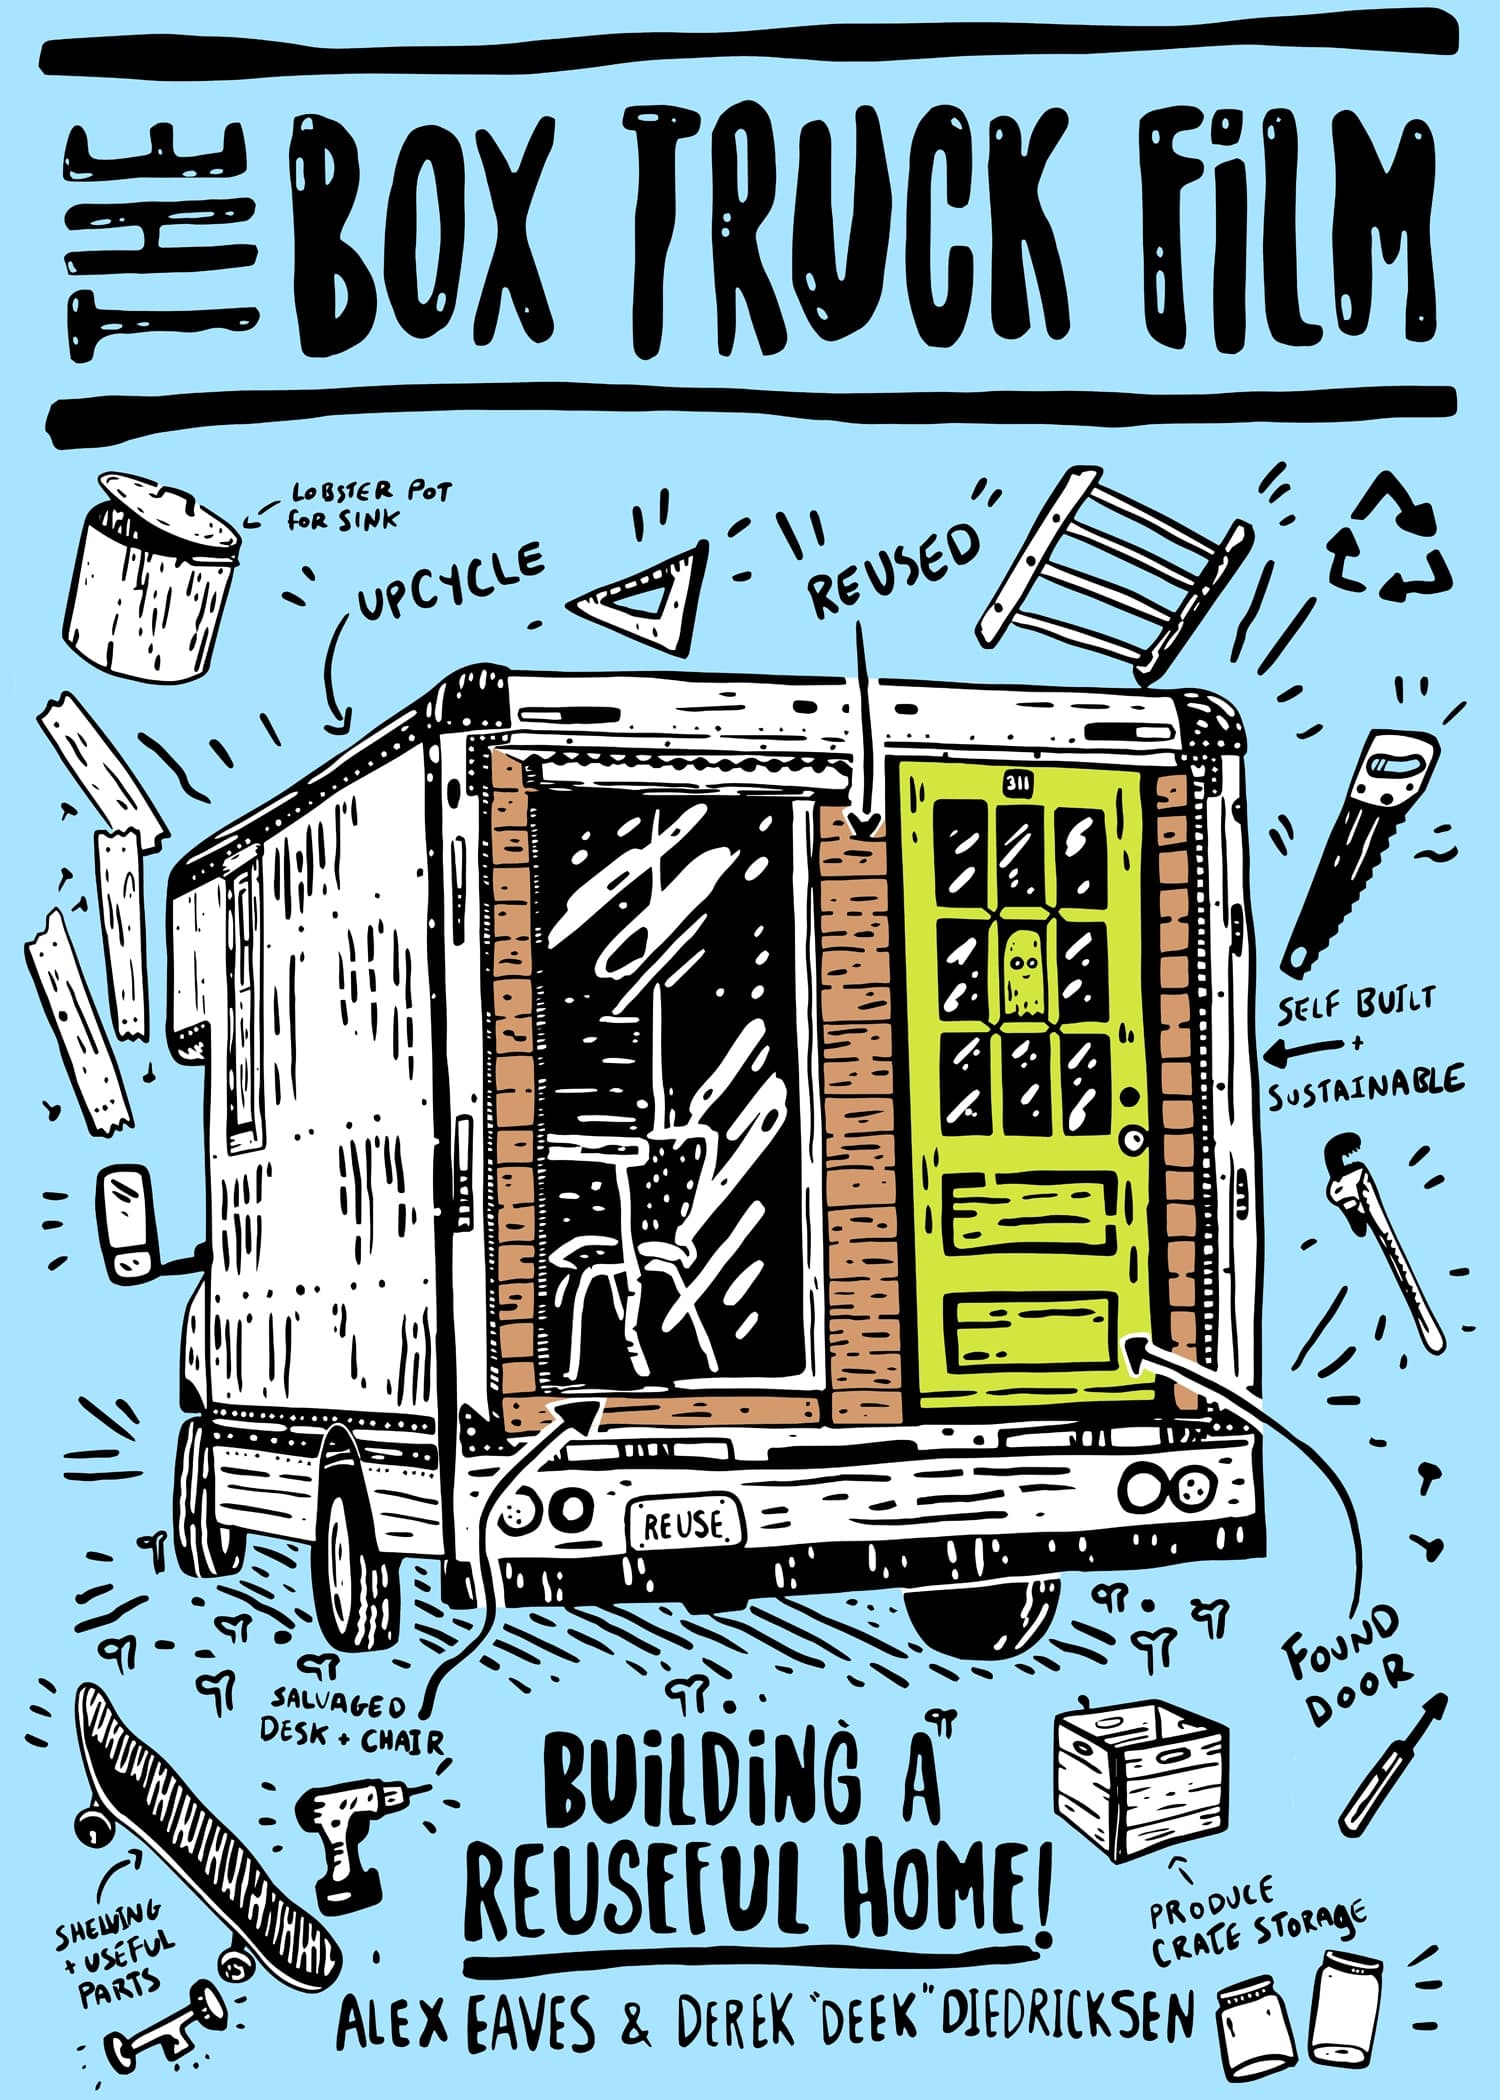 The Box Truck Film: Building A Reuseful Home